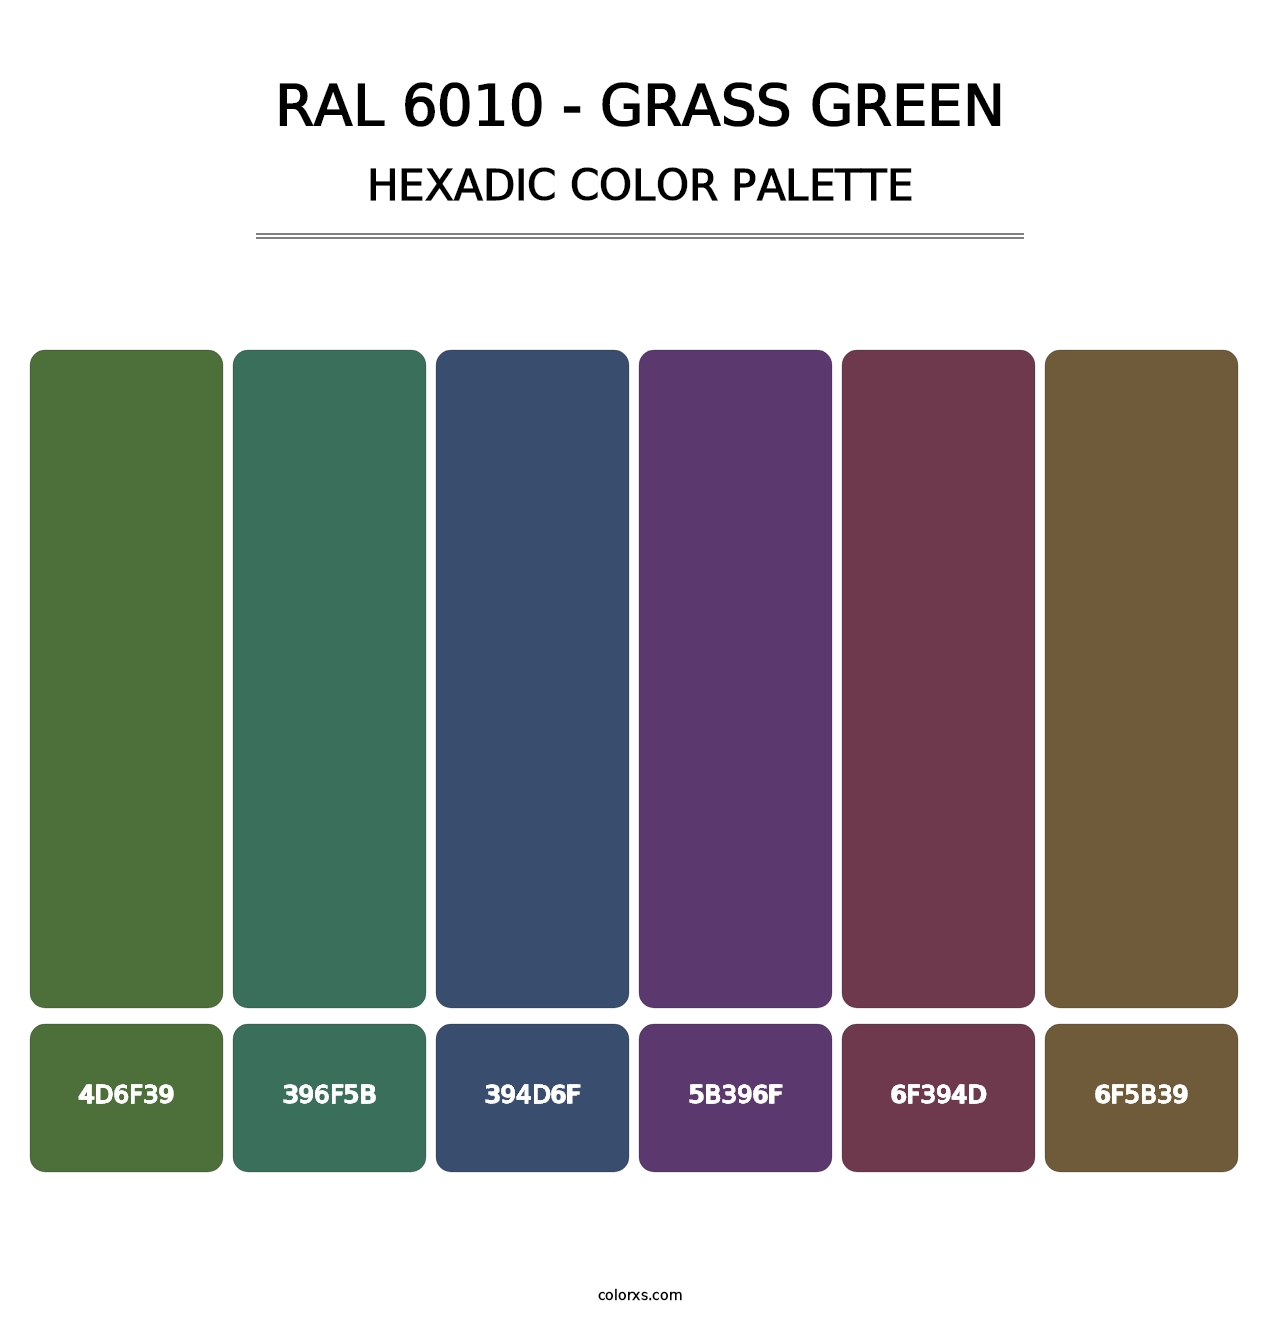 RAL 6010 - Grass Green - Hexadic Color Palette